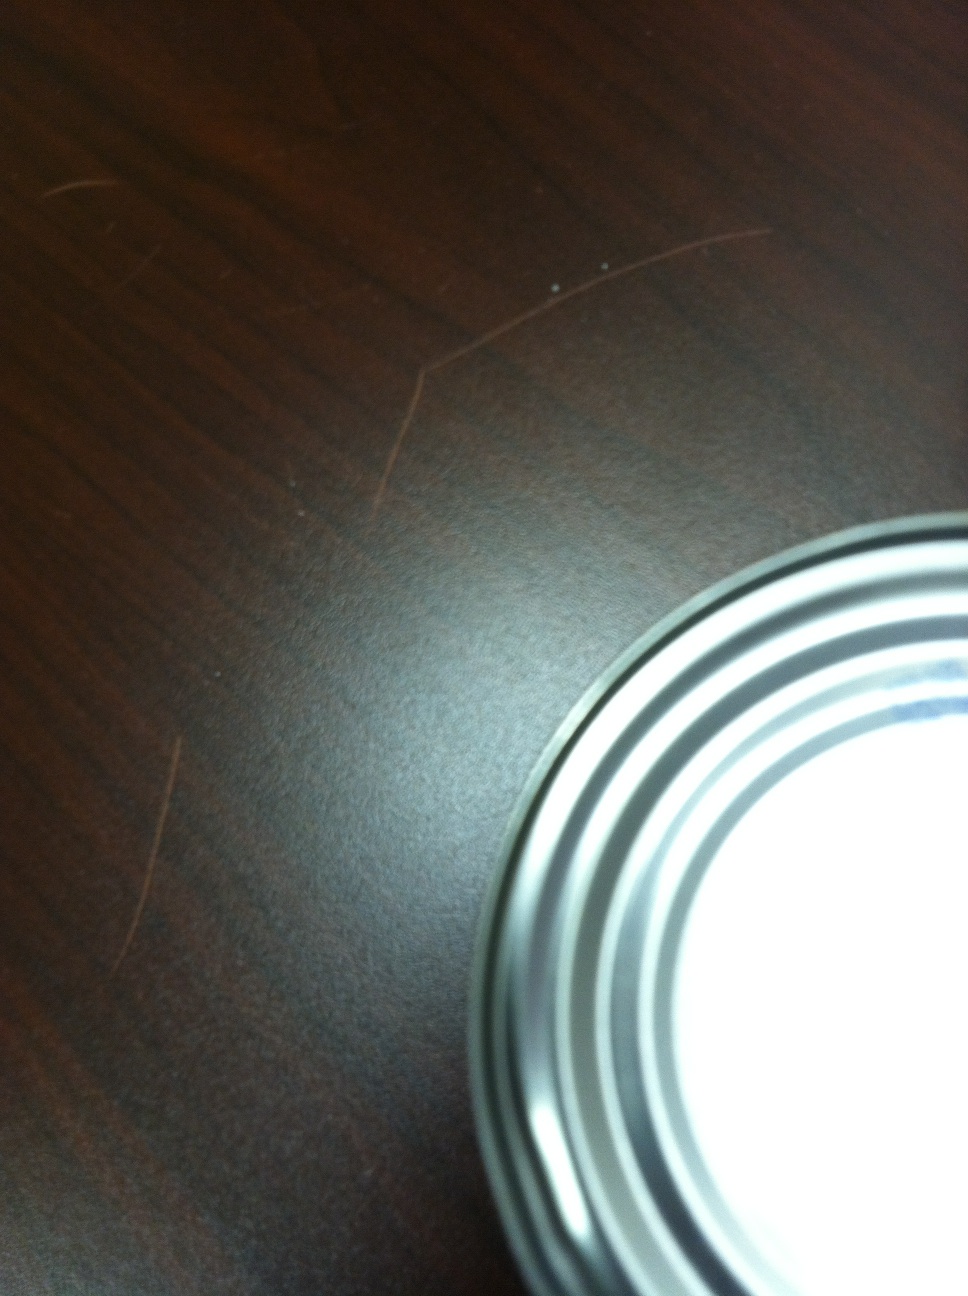 A photo captured by a person who is blind. A computer-generated caption for this photo is: A close up of a plate on a table.